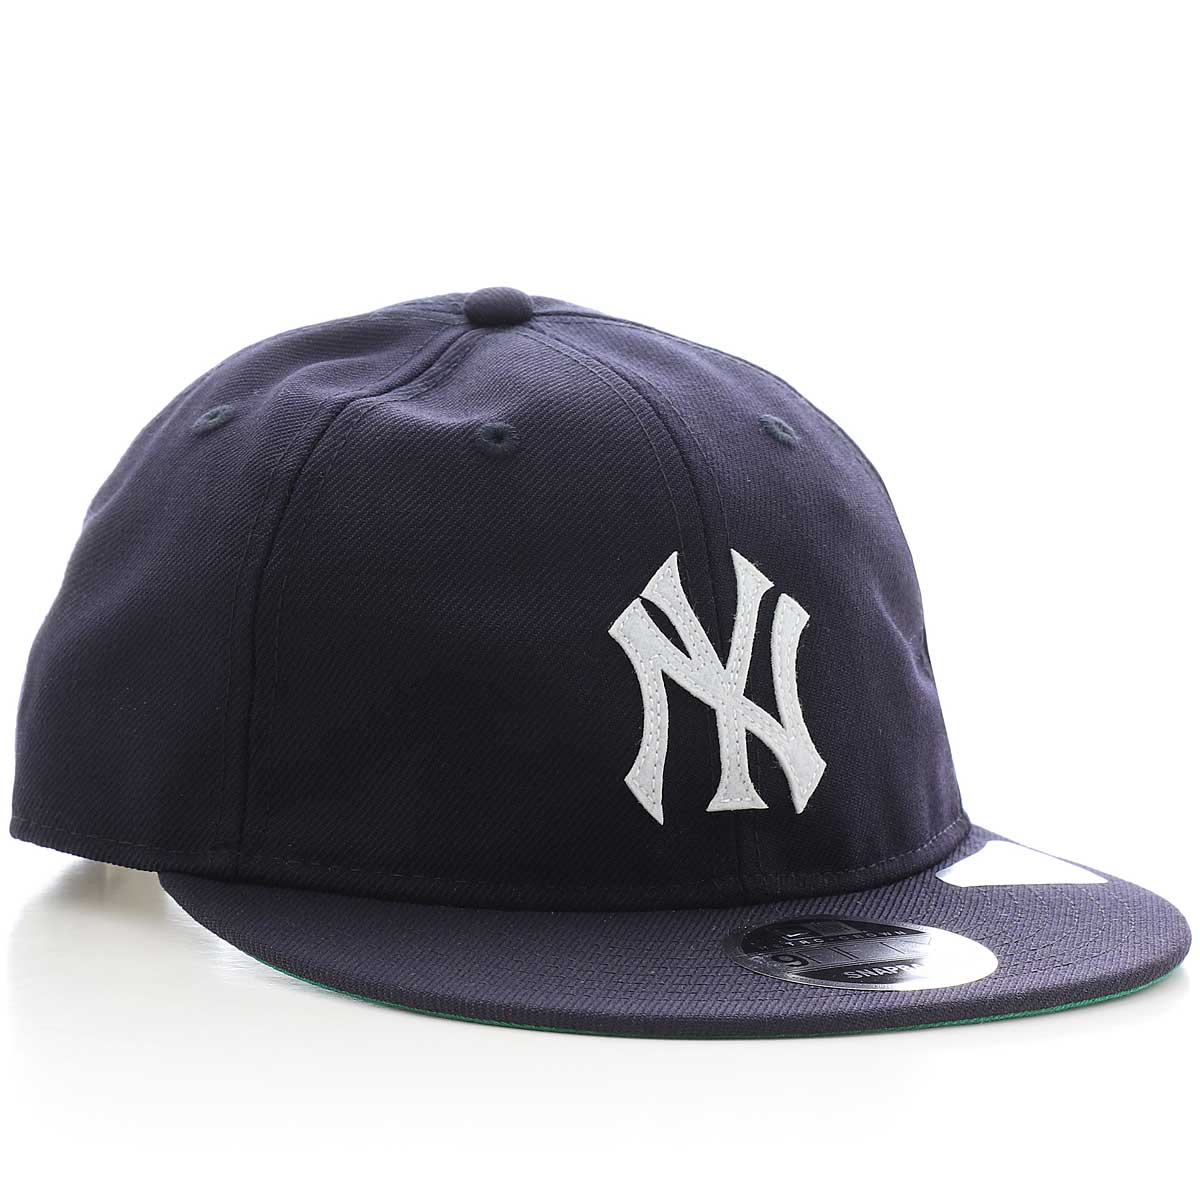 Official New Era Cooperstown New York Yankees Navy 59FIFTY Fitted Cap  B9123_435 B9123_435